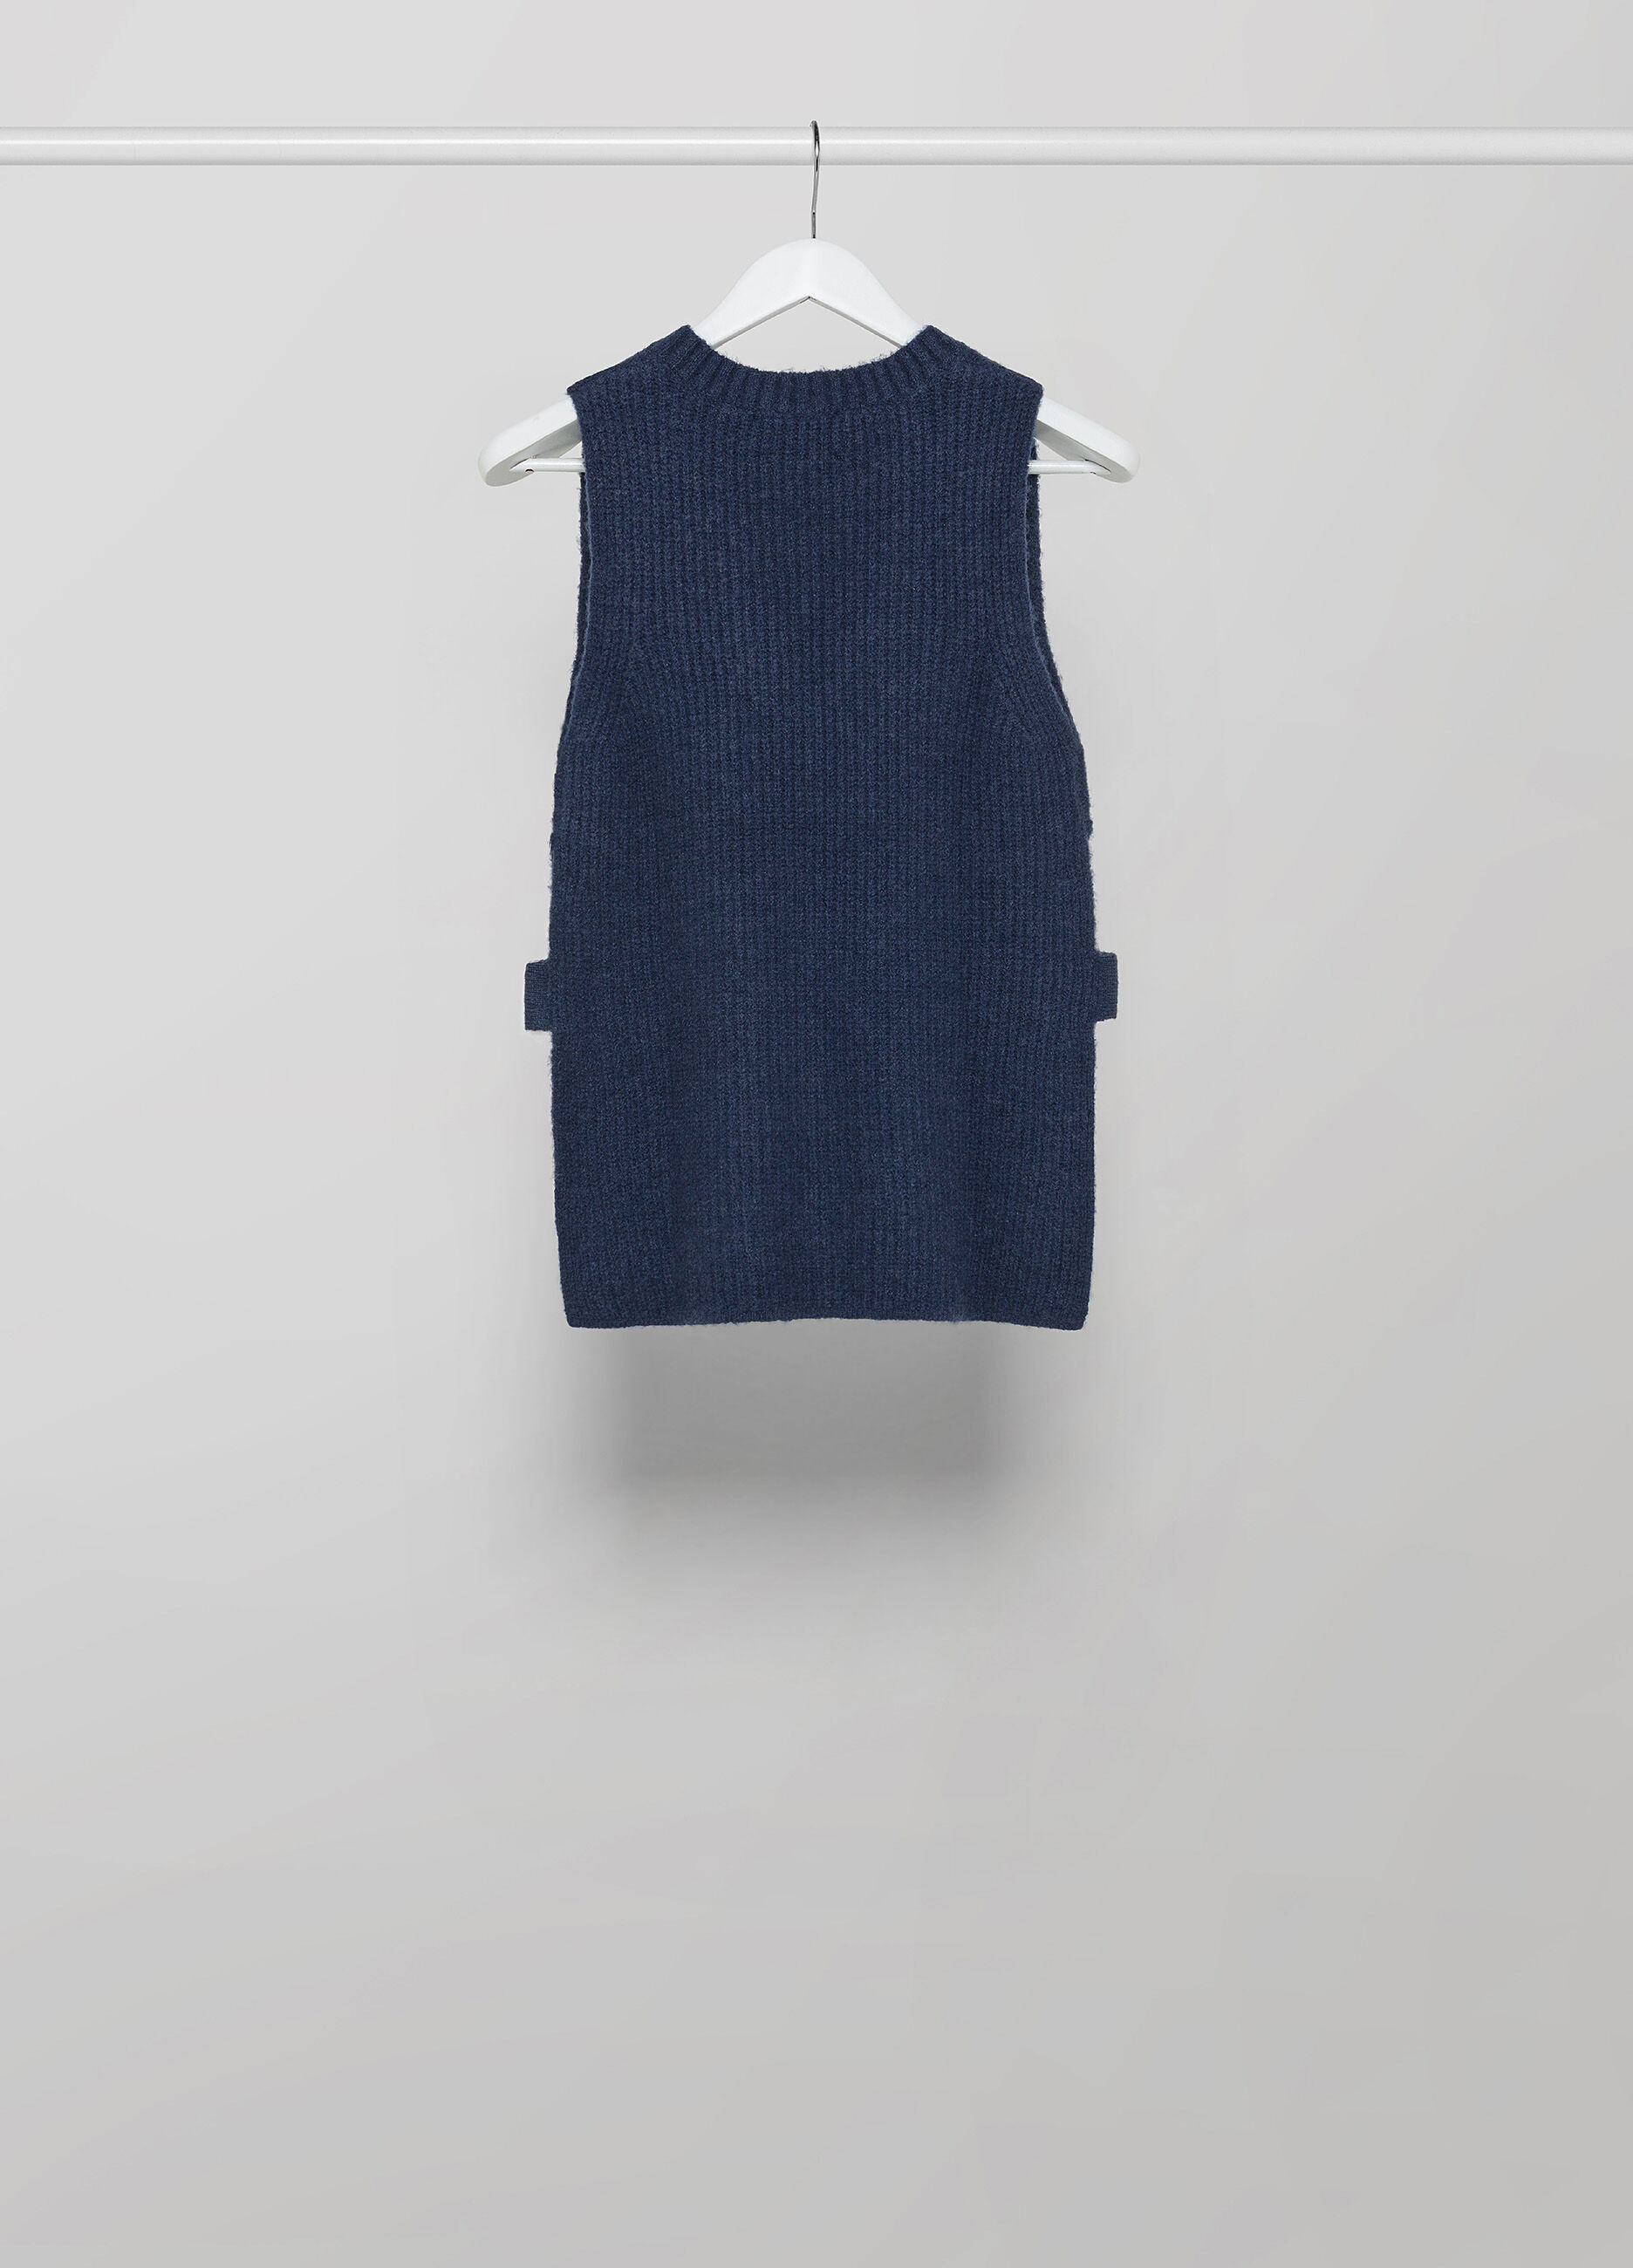 Wool-blend tricot waistcoat with side slits